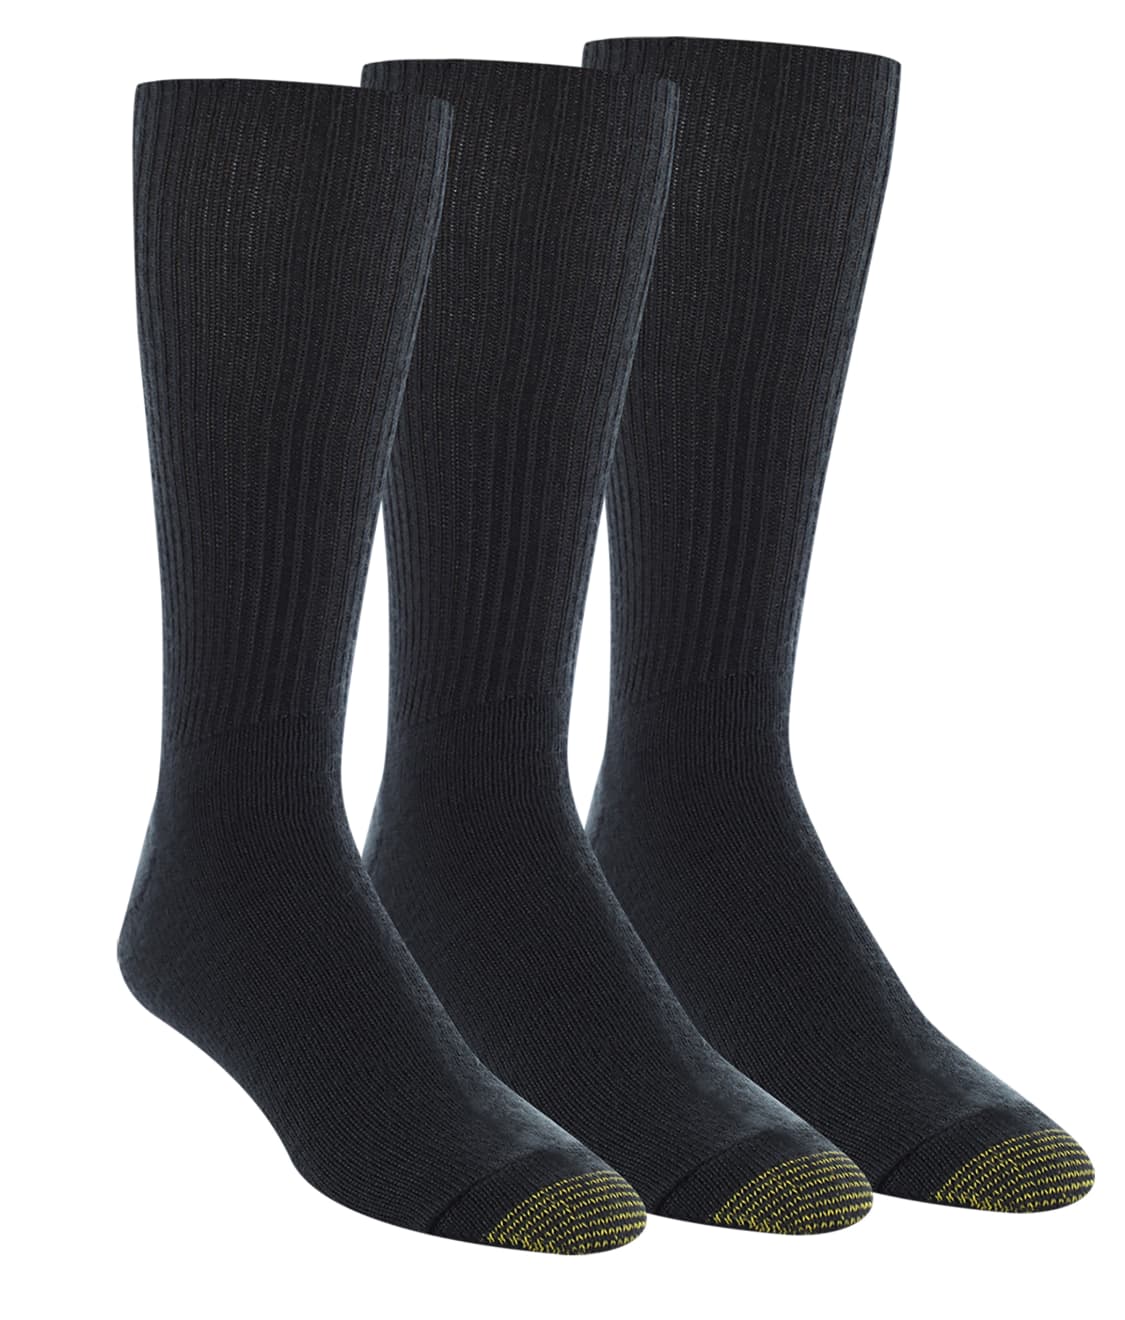 Gold Toe Fluffies Big & Tall Socks 3-Pack & Reviews | Bare Necessities ...